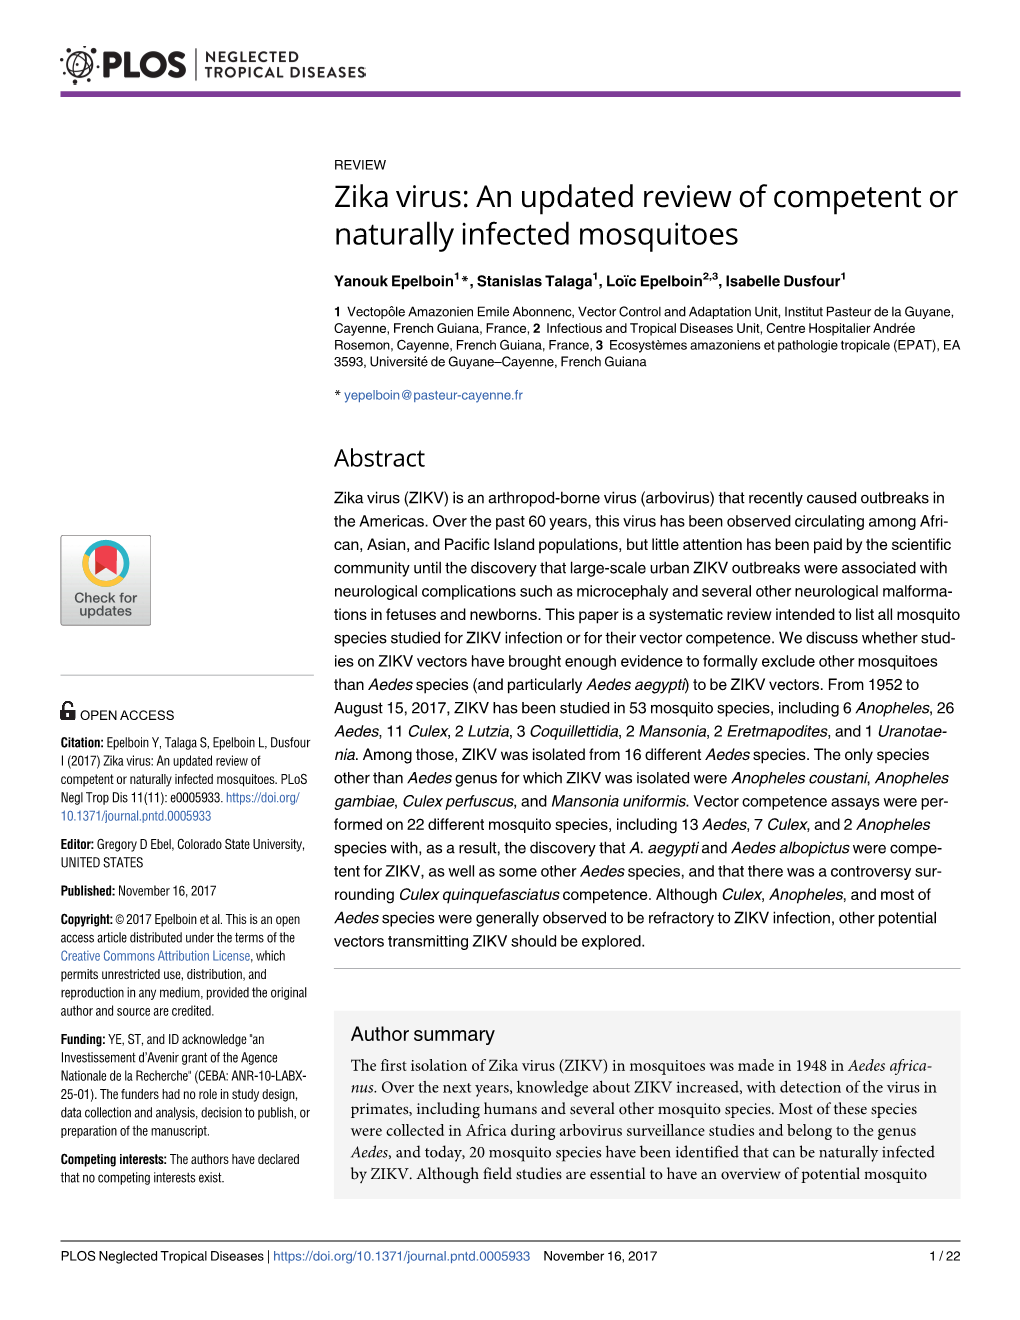 Zika Virus: an Updated Review of Competent Or Naturally Infected Mosquitoes